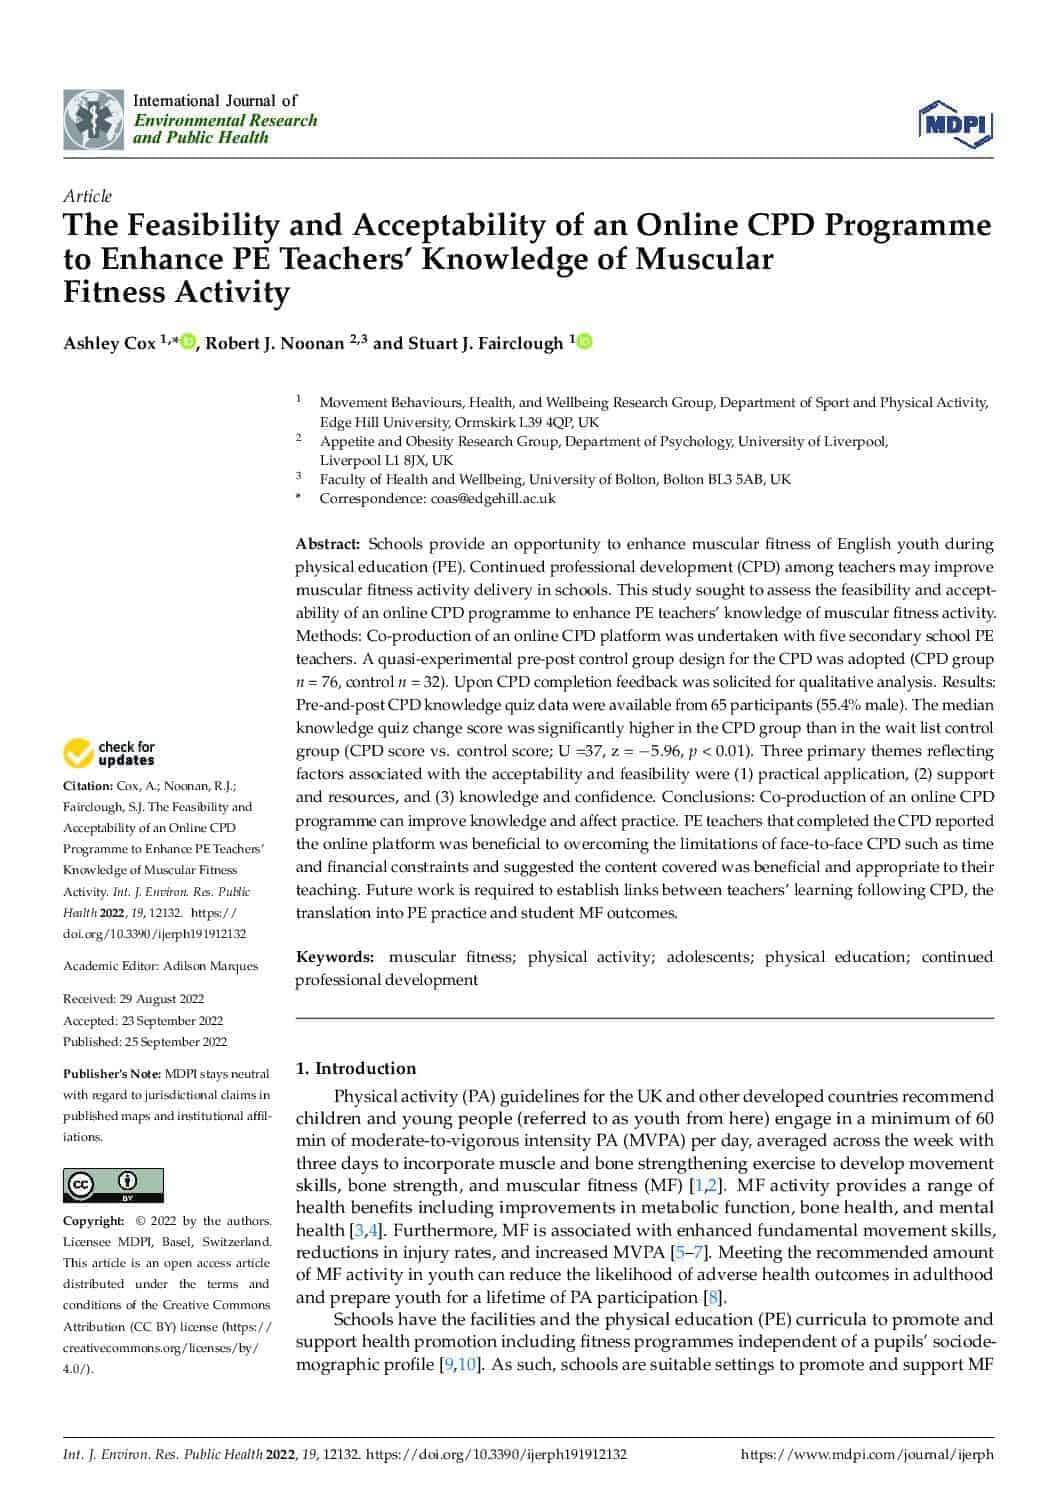 The Feasibility and Acceptability of an Online CPD Programme to Enhance PE Teachers’ Knowledge of Muscular Fitness Activity